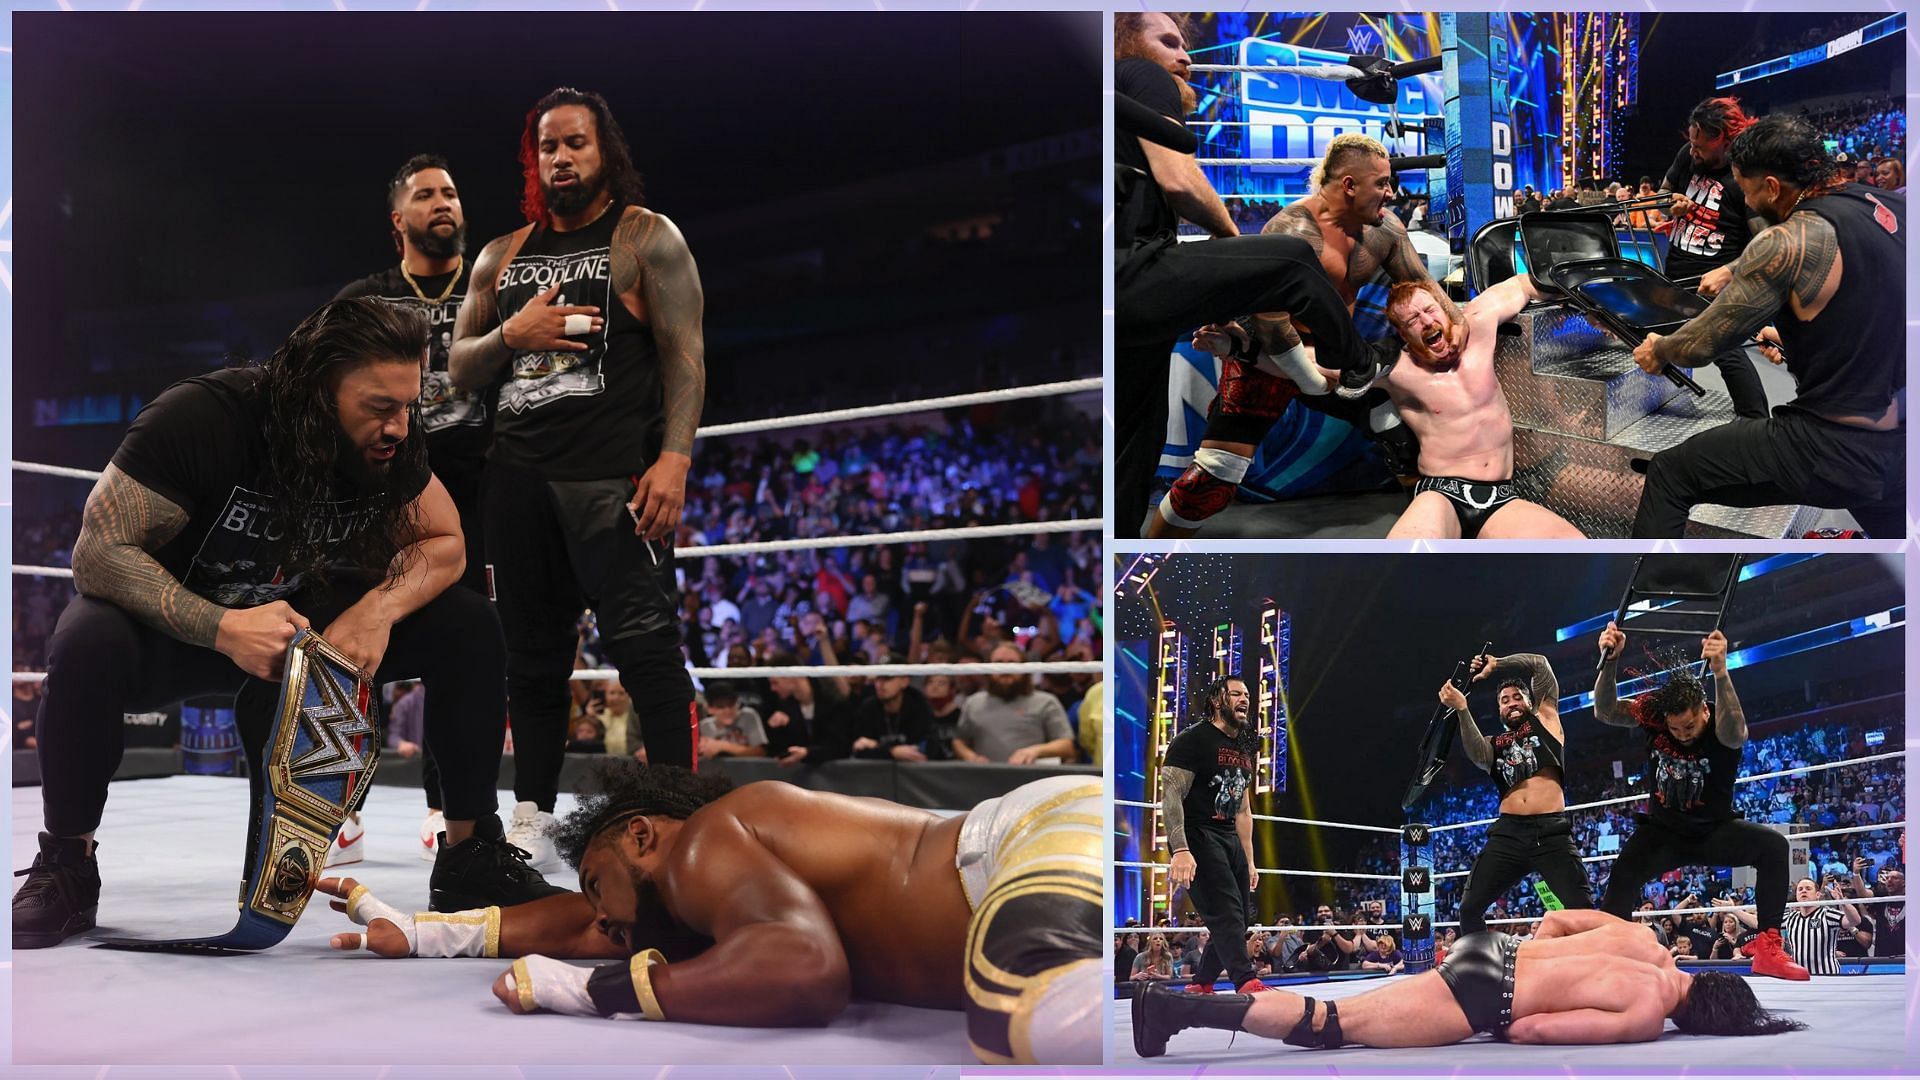 The Bloodline showed yet another dominance performance on WWE RAW.